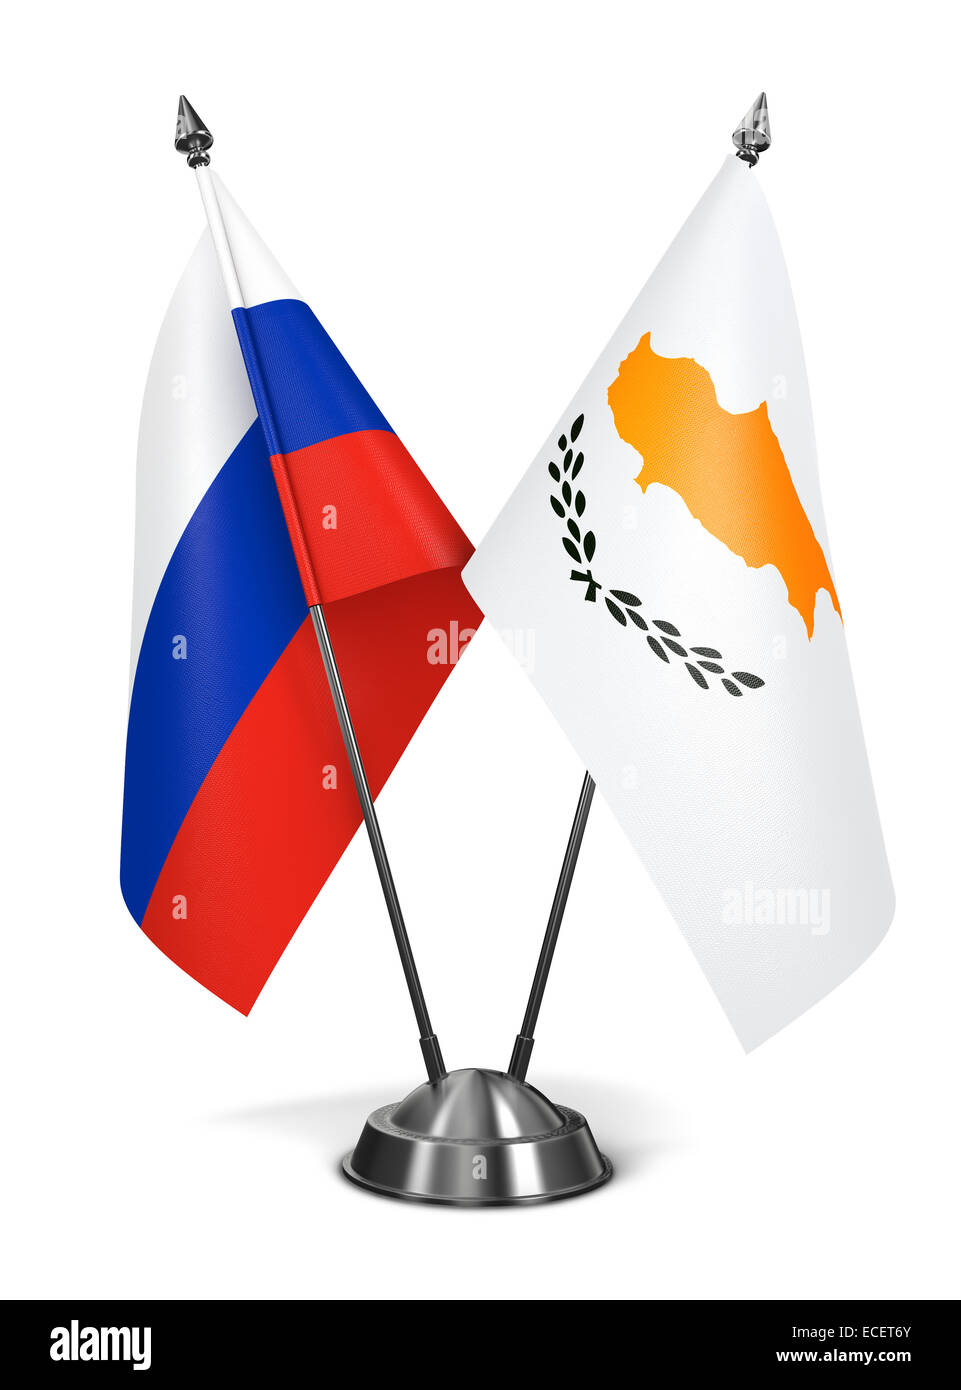 Russia and Cyprus - Miniature Flags. Stock Photo